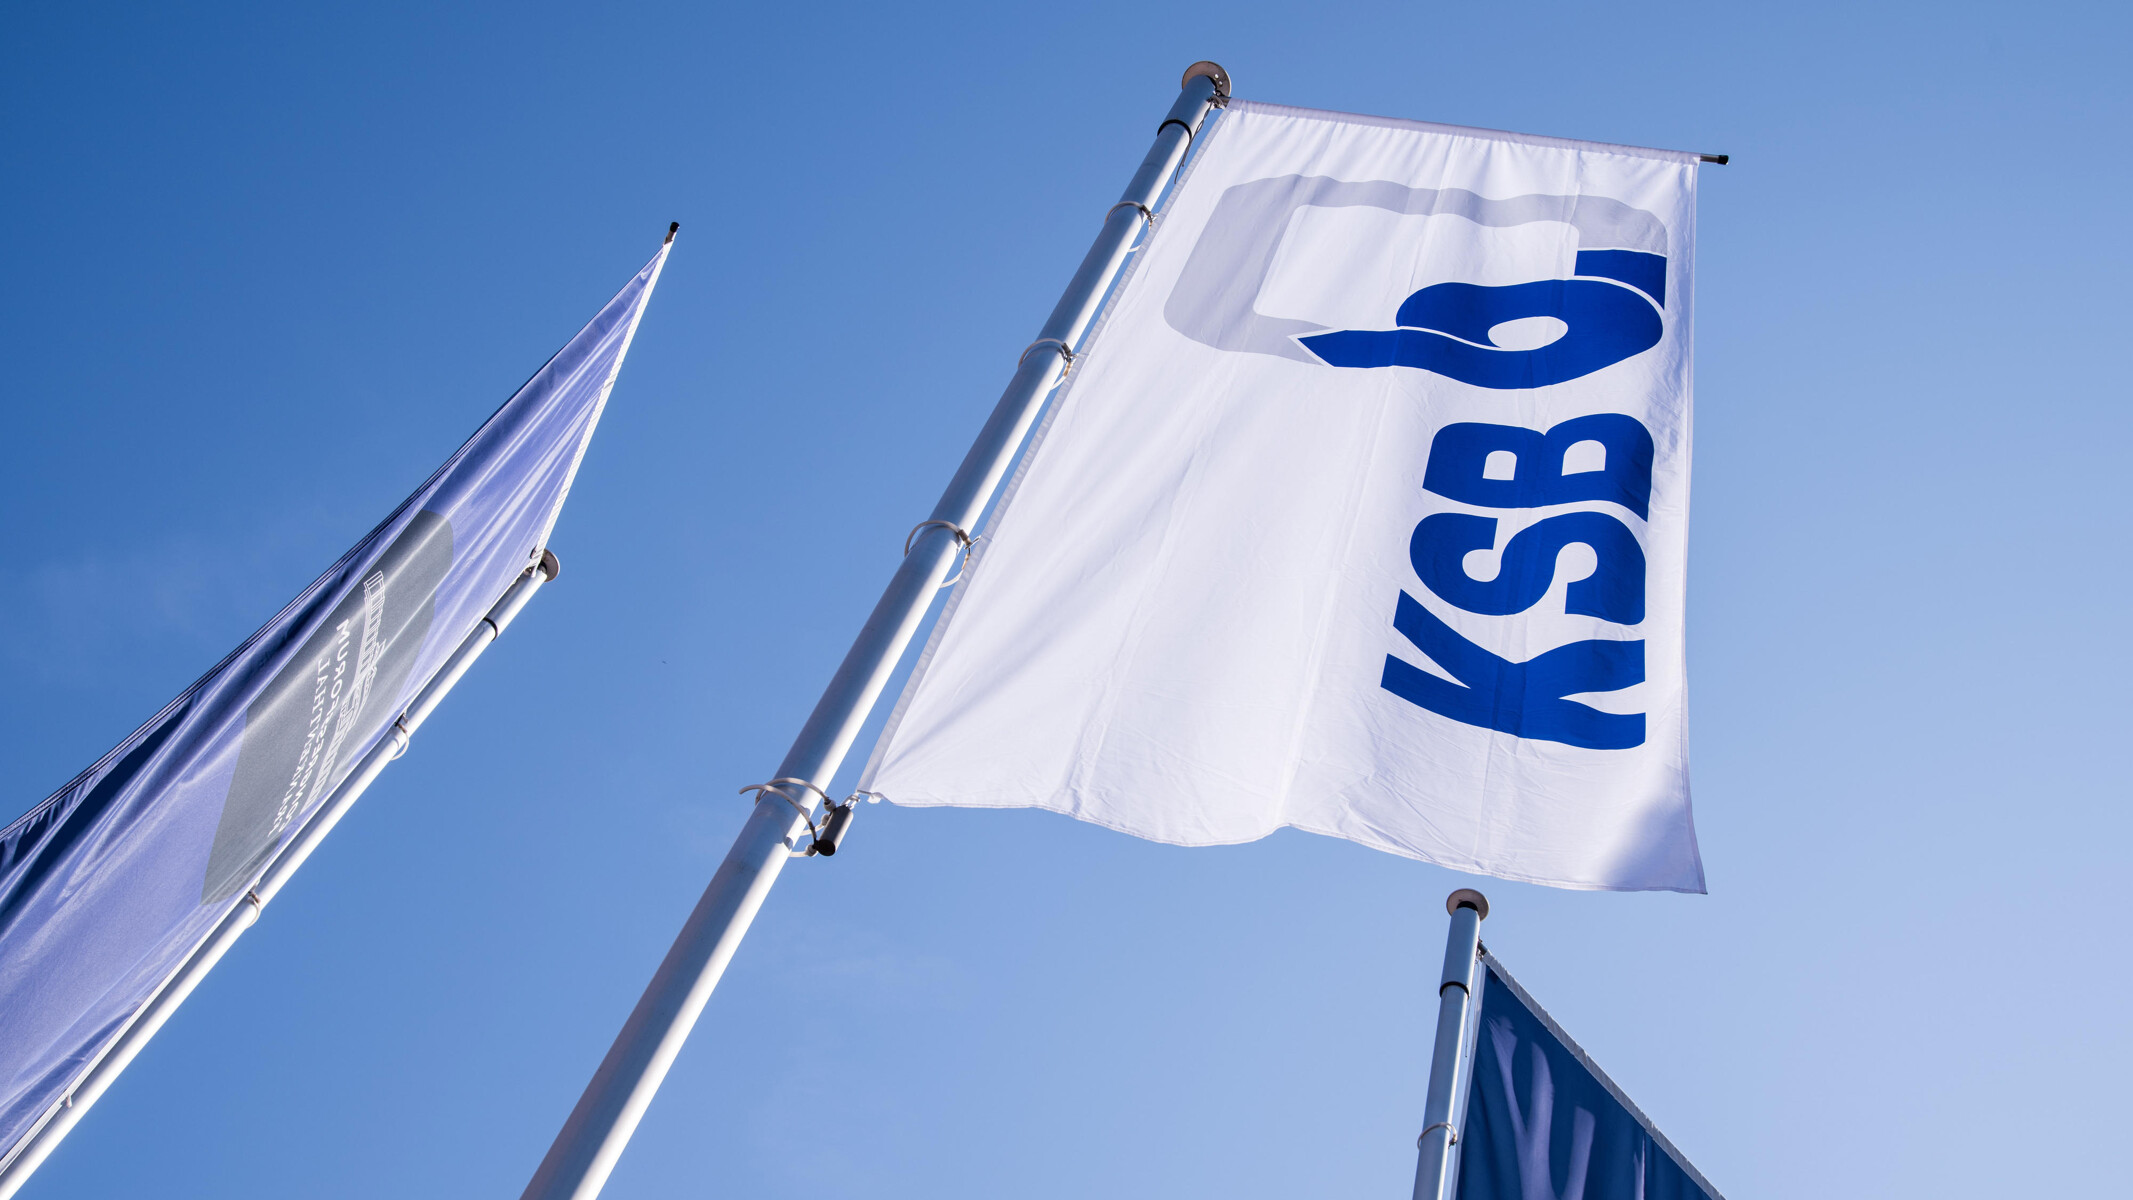 KSB flags in front of blue sky